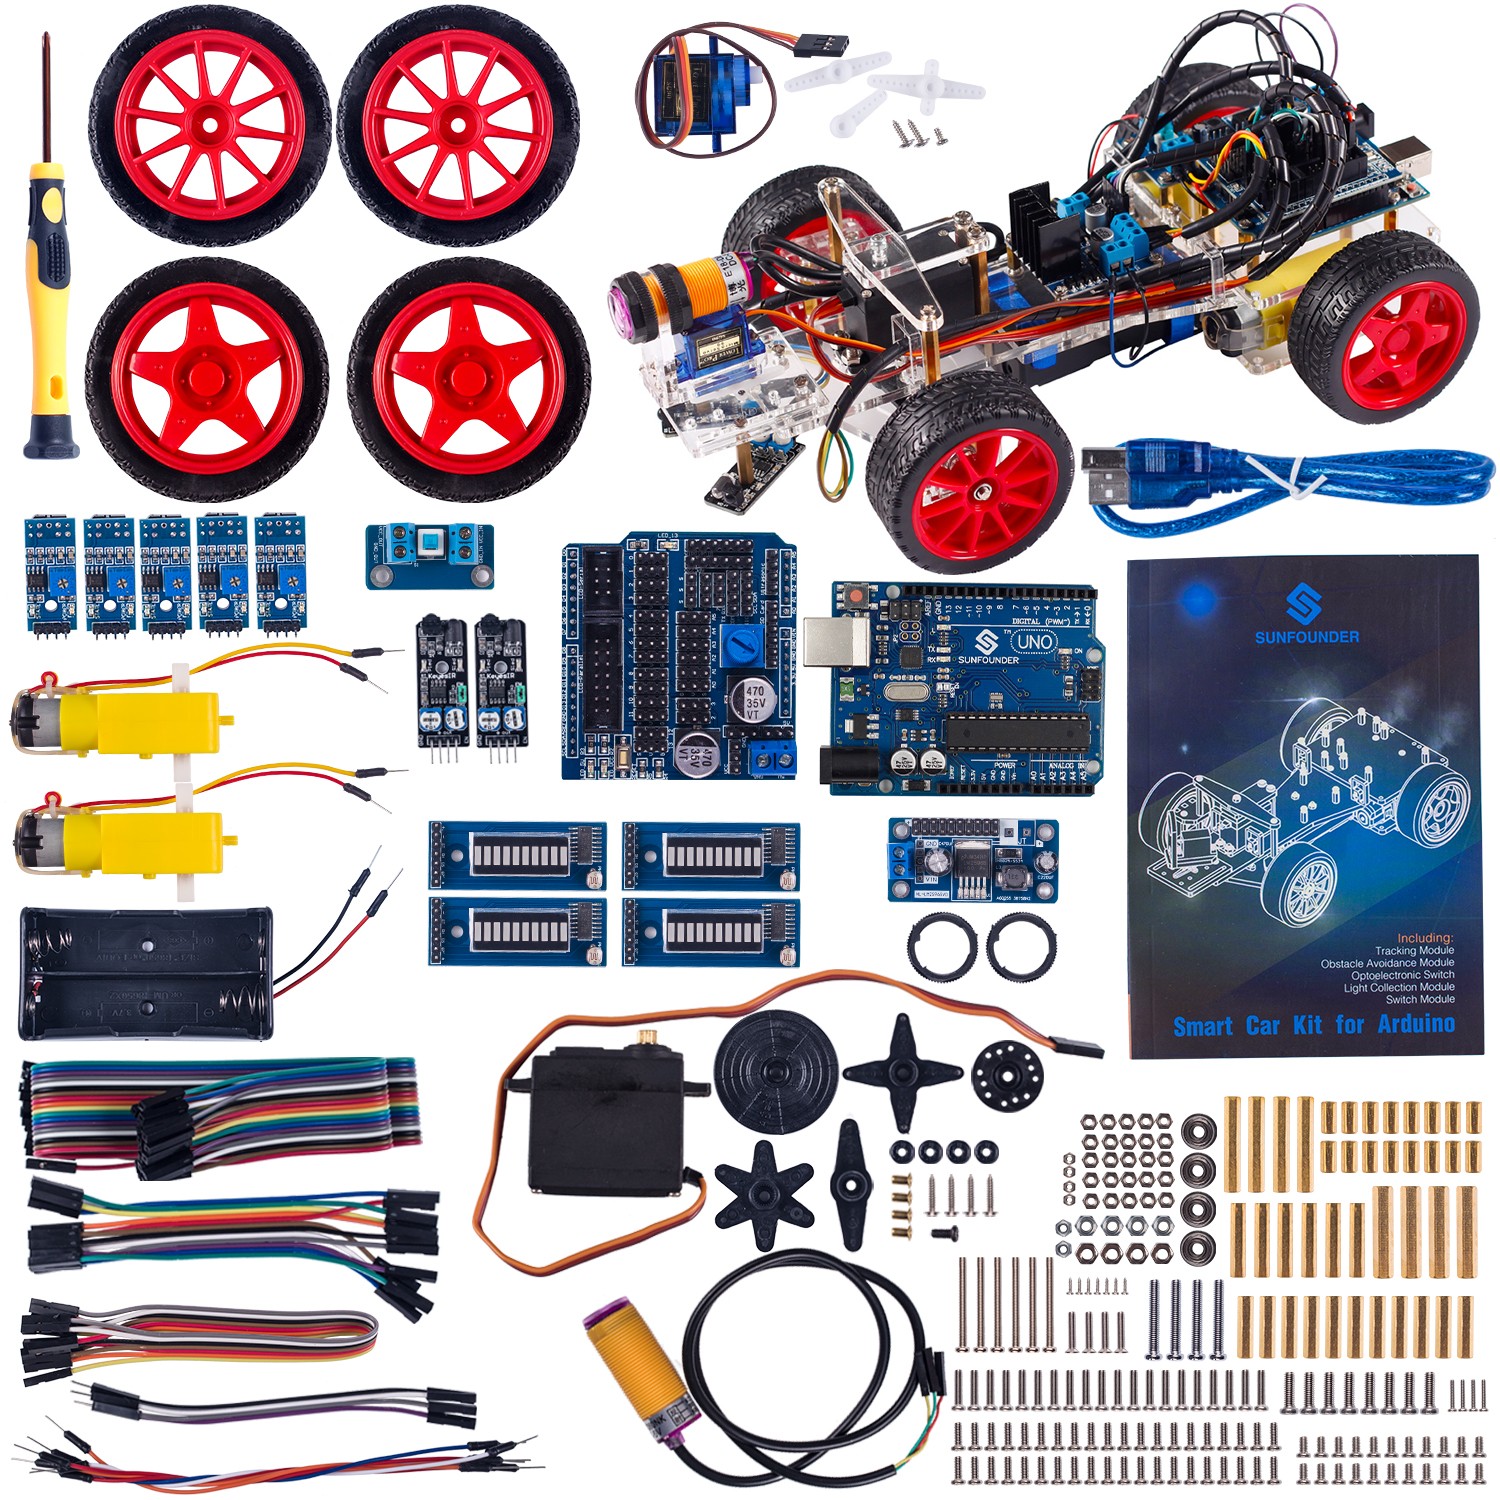 Smart Car Kit for Arduino with Uno R3, Obstacle Avoiding, Line Tracing and Light Seeking